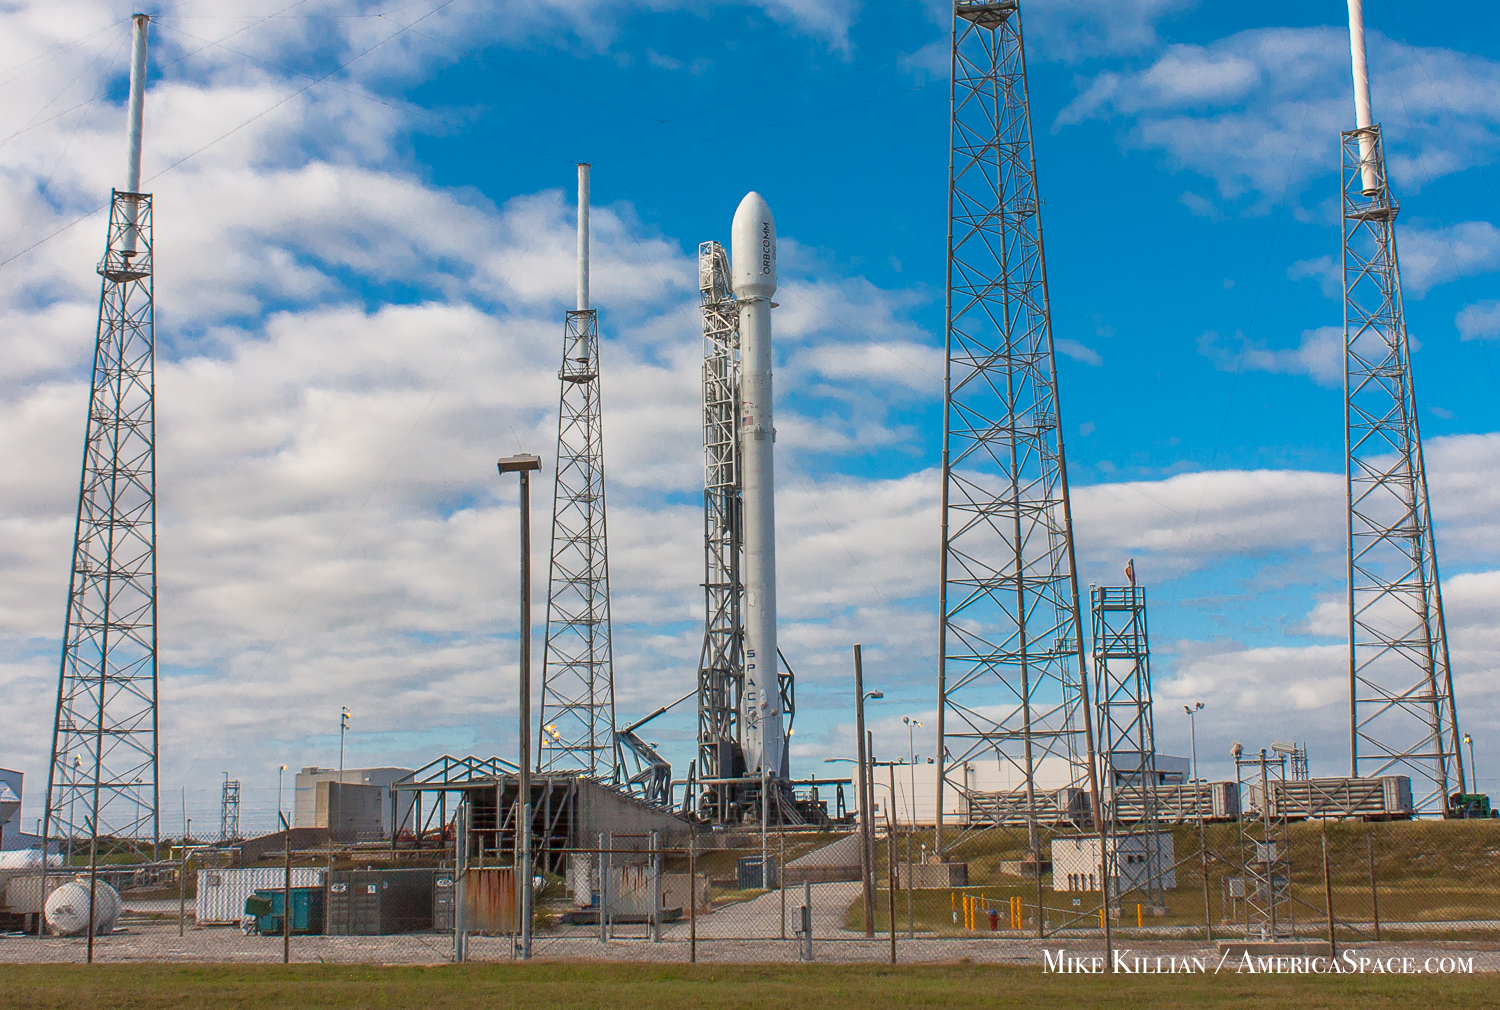 SpaceX is scheduled to launch their Falcon-9 rocket tonight on its first launch since the loss of CRS-7 last summer. The mission is to deliver 11 OG2 satellites to low-Earth orbit for Orbcomm, but SpaceX has a secondary objective to land the booster's first stage back at Cape Canaveral minutes after launch, on a landing pad at the Cape's former Launch Complex 13; it is now Landing Zone 1. Photo Credit: Mike Killian / AmericaSpace